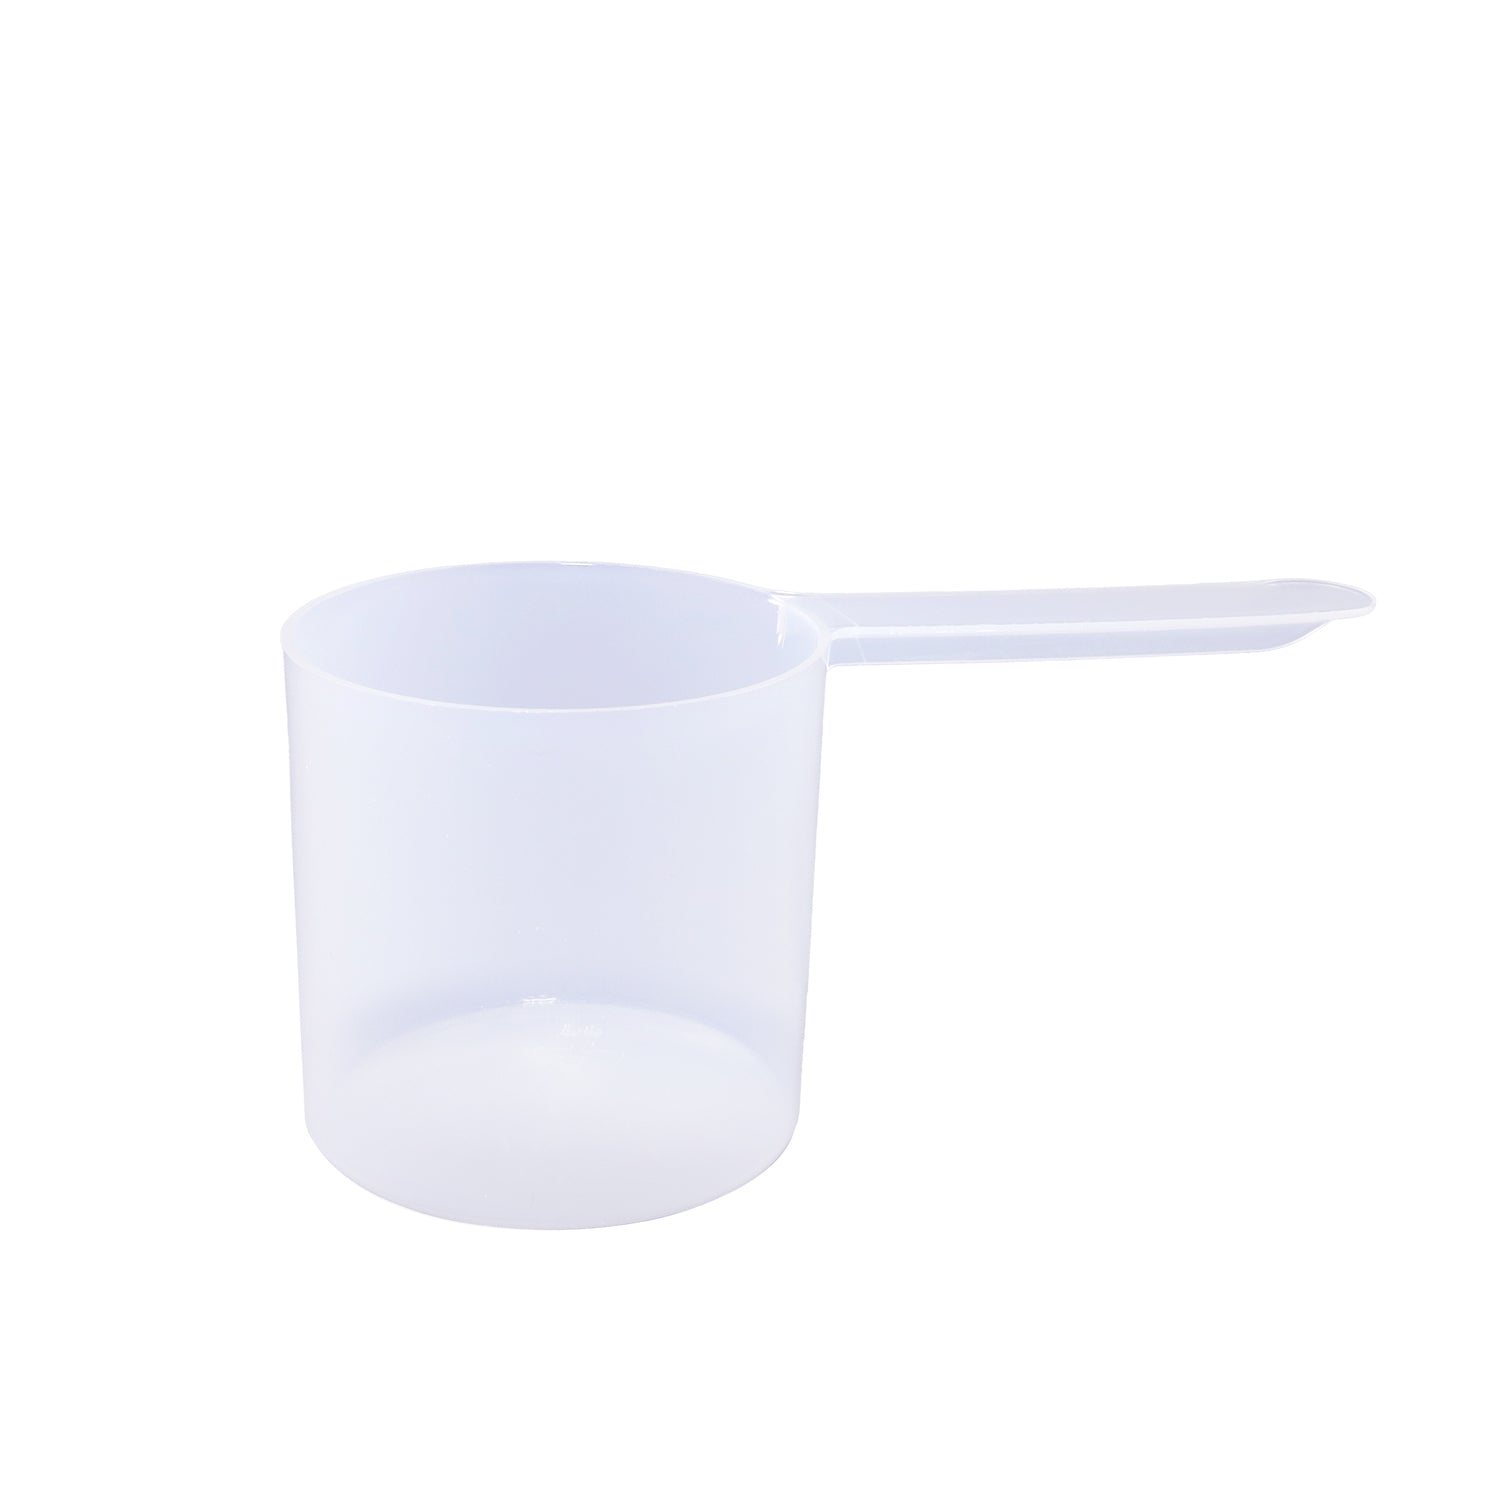 1/2 Cup (4 Oz.  118.4 mL) Long Handle Scoop for Measuring Coffee, Pet  Food, Grains, Protein, Spices and Other Dry Goods BPA Free $11.99